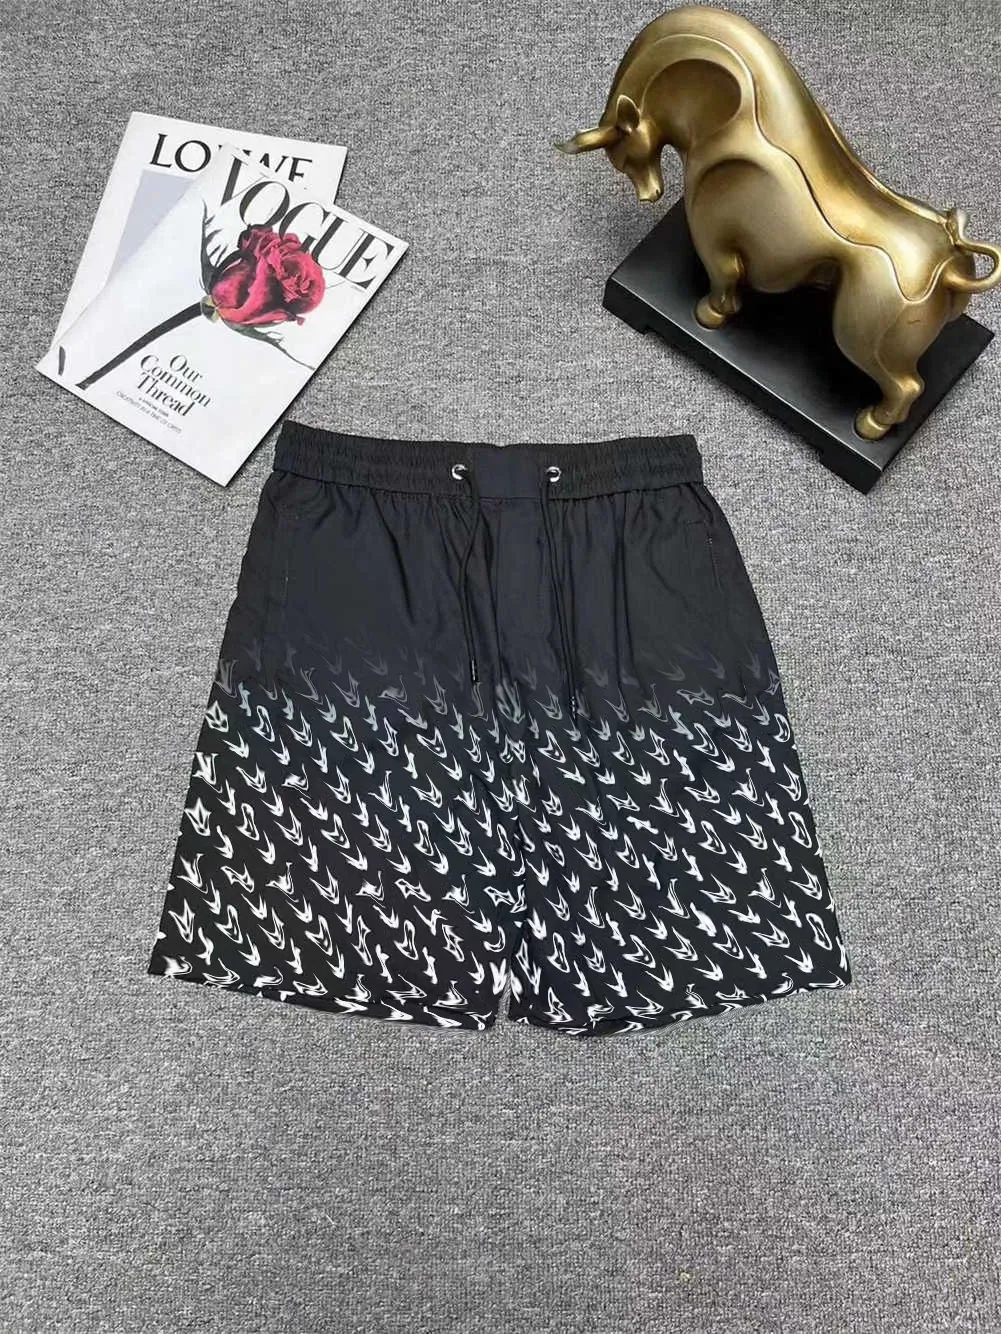 New Men's shorts Fashion Designer Casual Shorts Classic Embroidered pattern printed letters Summer quick drying swimwear Street beach pants Asian size M-3XL #GH41